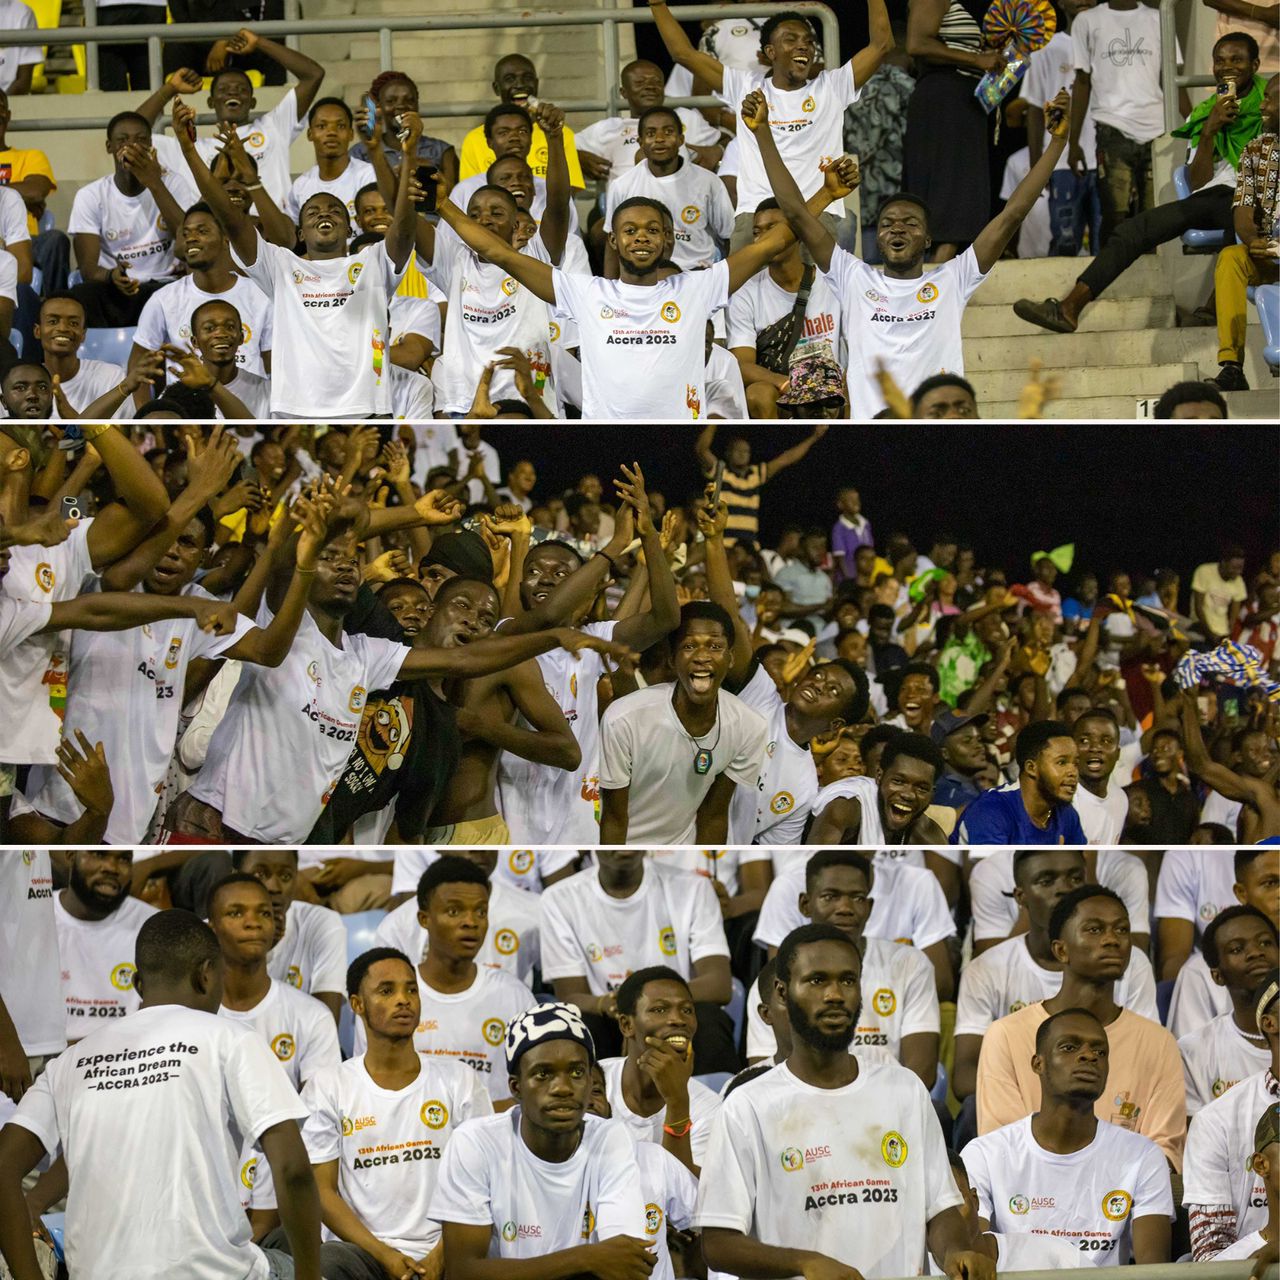 GFA salutes all for support during African Games Women's football competition in Cape Coast